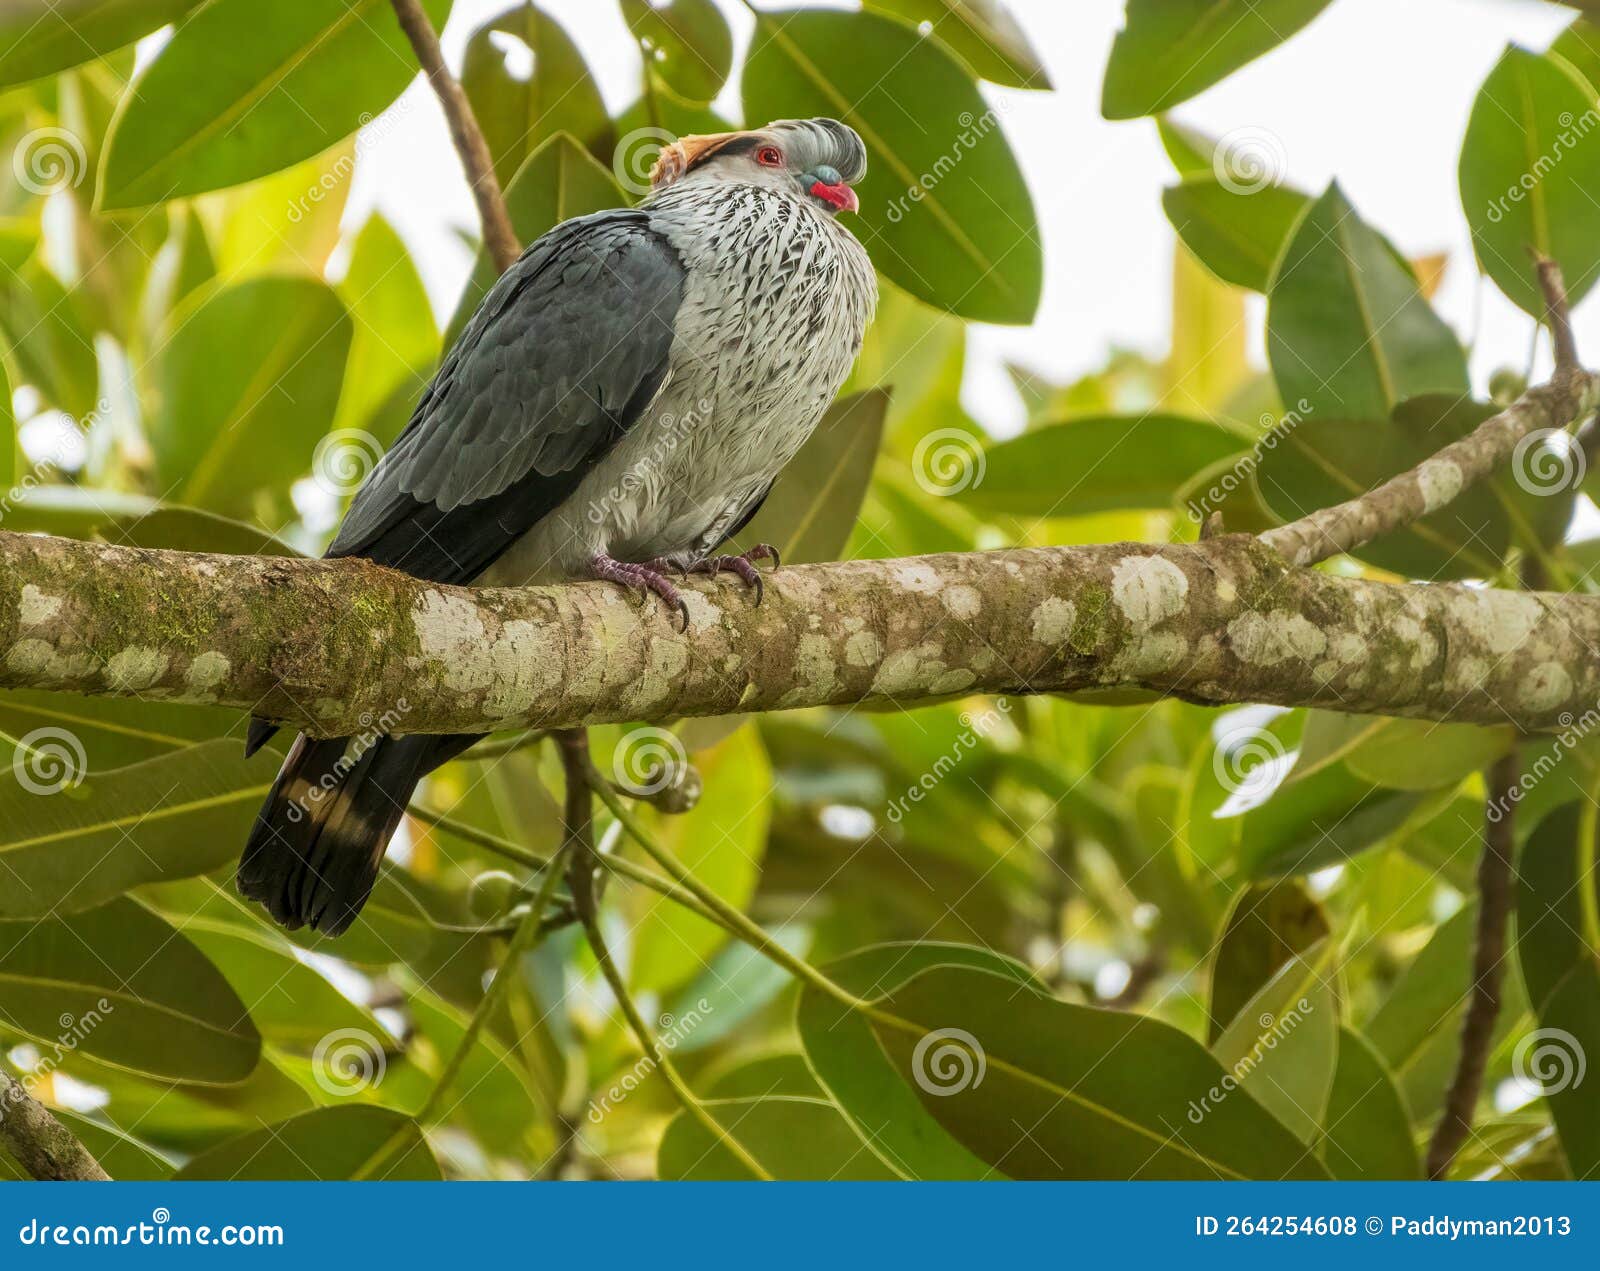 topknot pigeon lopholaimus antarcticus perched in a fig tree